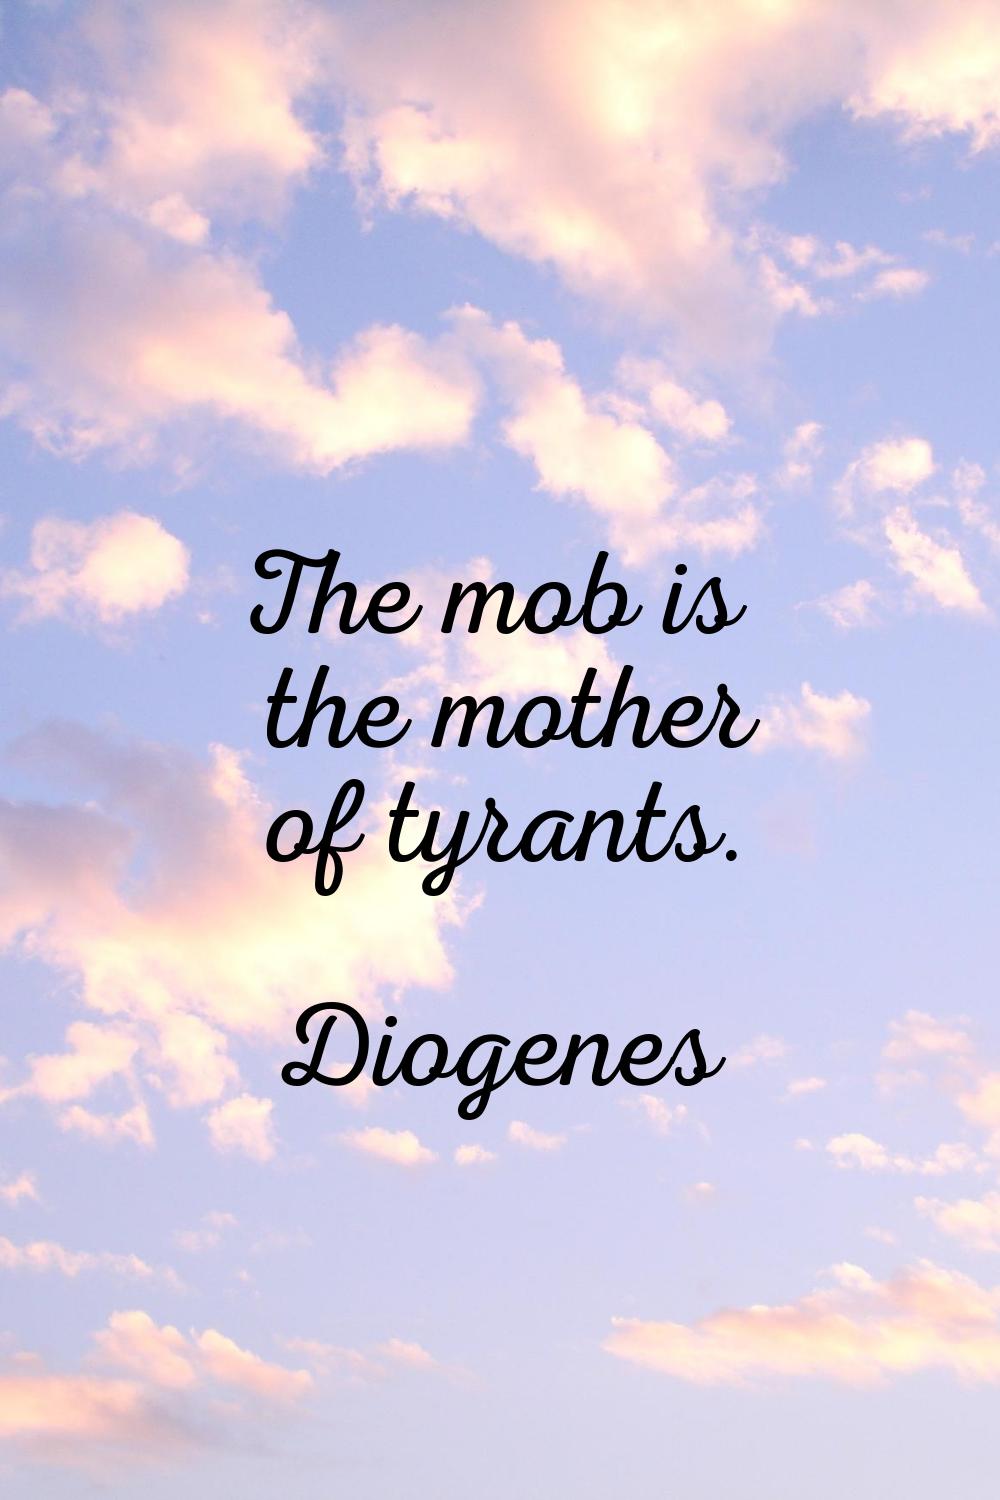 The mob is the mother of tyrants.